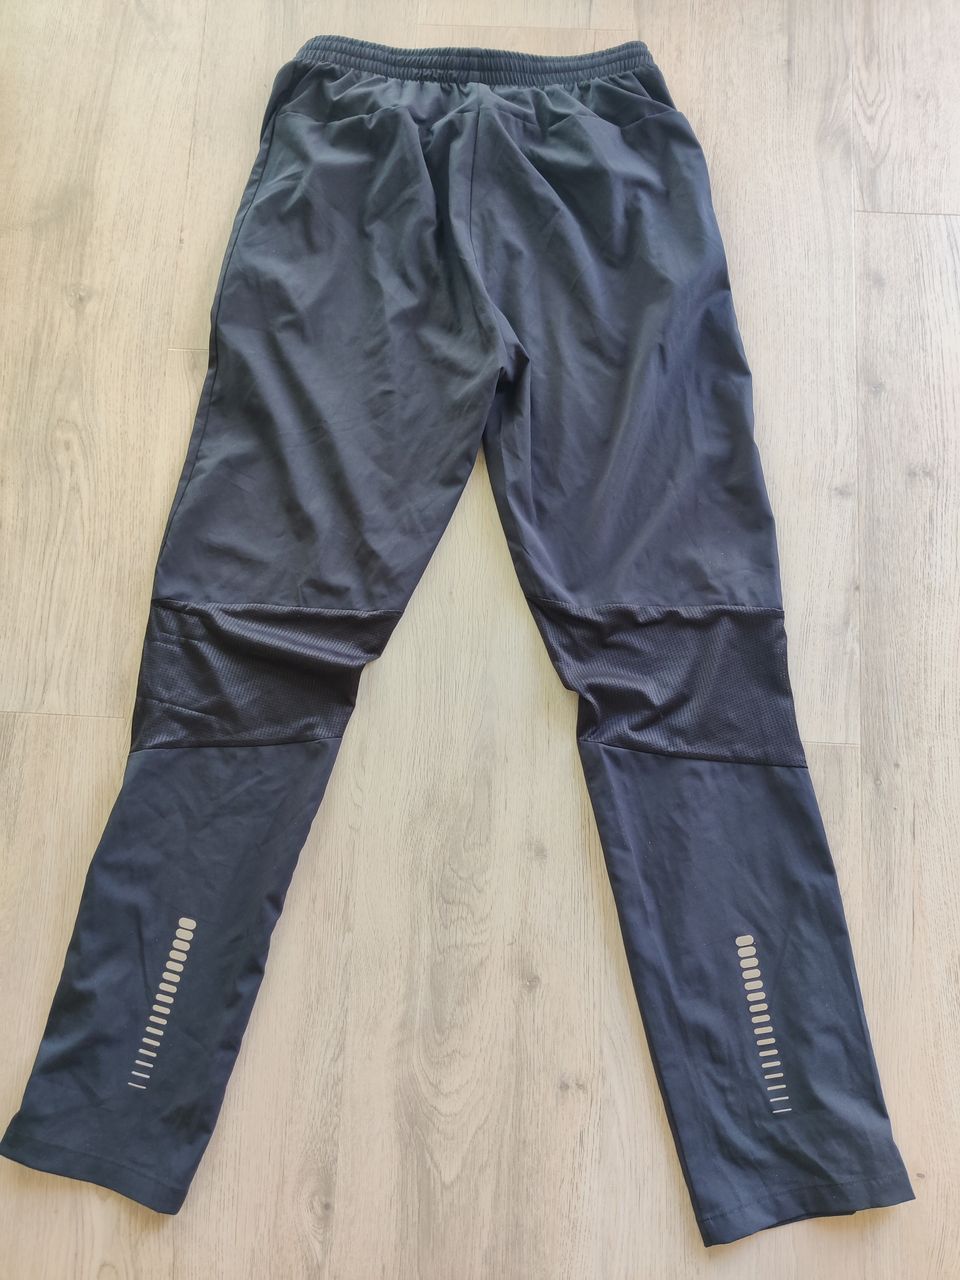 Ronhill wind pant W 40